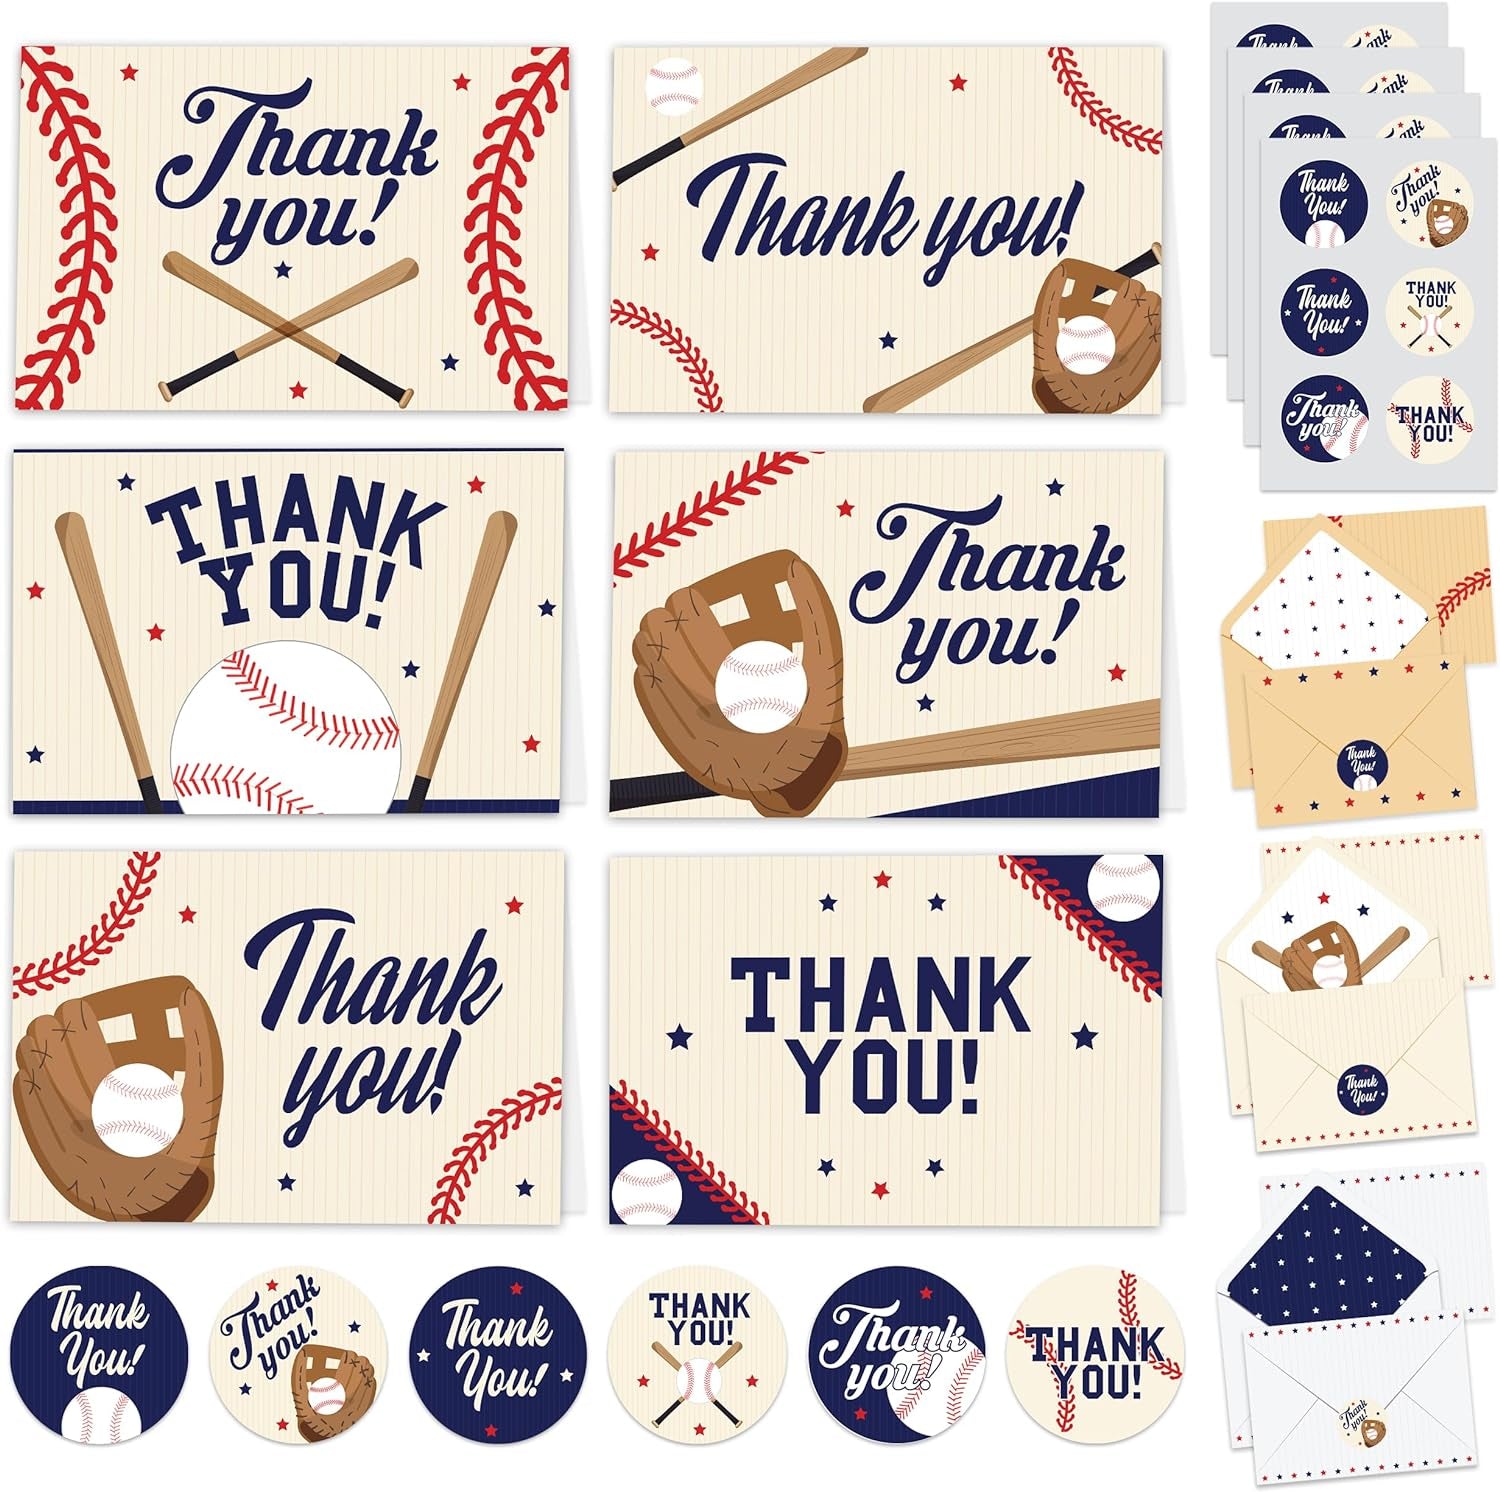 Baseball Thank You Cards, 24Pcs Greeting Card with 6 Designs, Blank Inside, 6X4 Inch, Matching Envelopes & Stickers, Perfect for Birthday, Coach, Father'S Day, Kid Thank You Cards